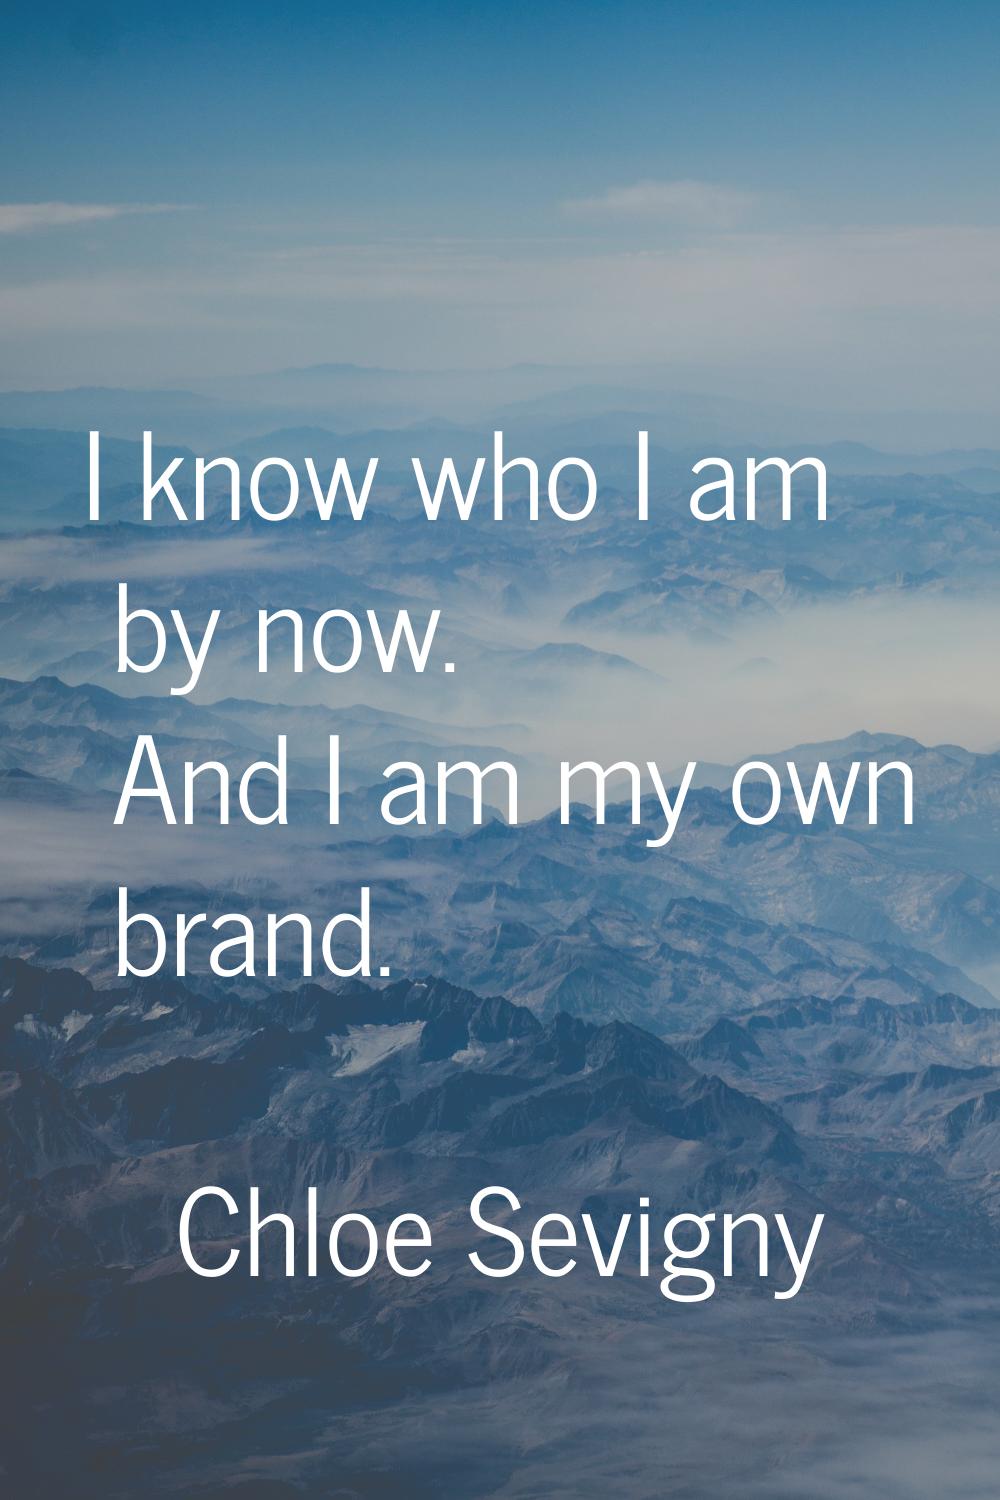 I know who I am by now. And I am my own brand.